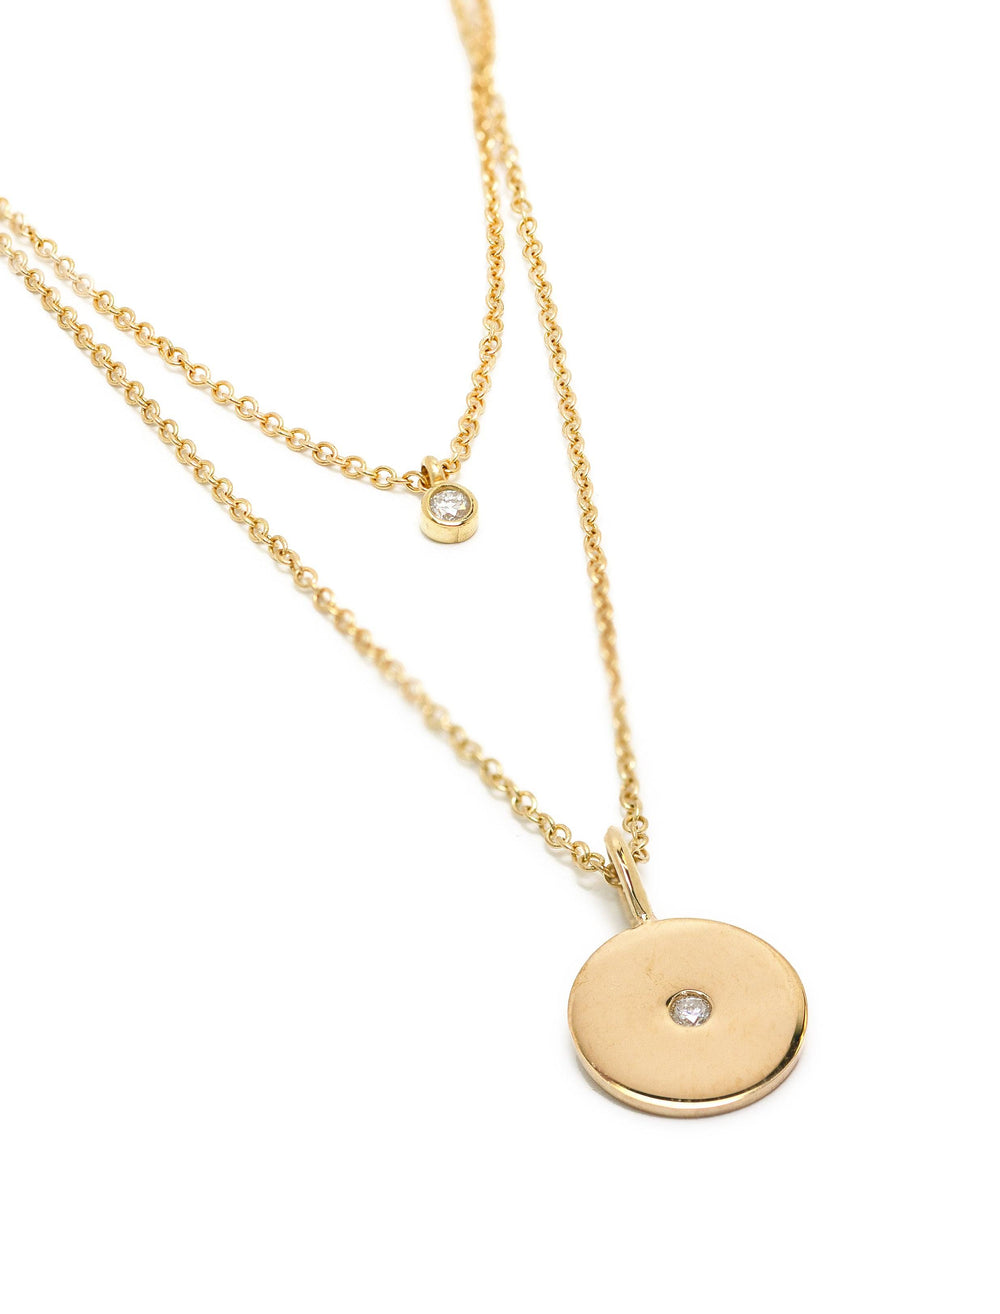 Close-up view of Zoe Chicco's 14k double layer diamond and disc necklace.